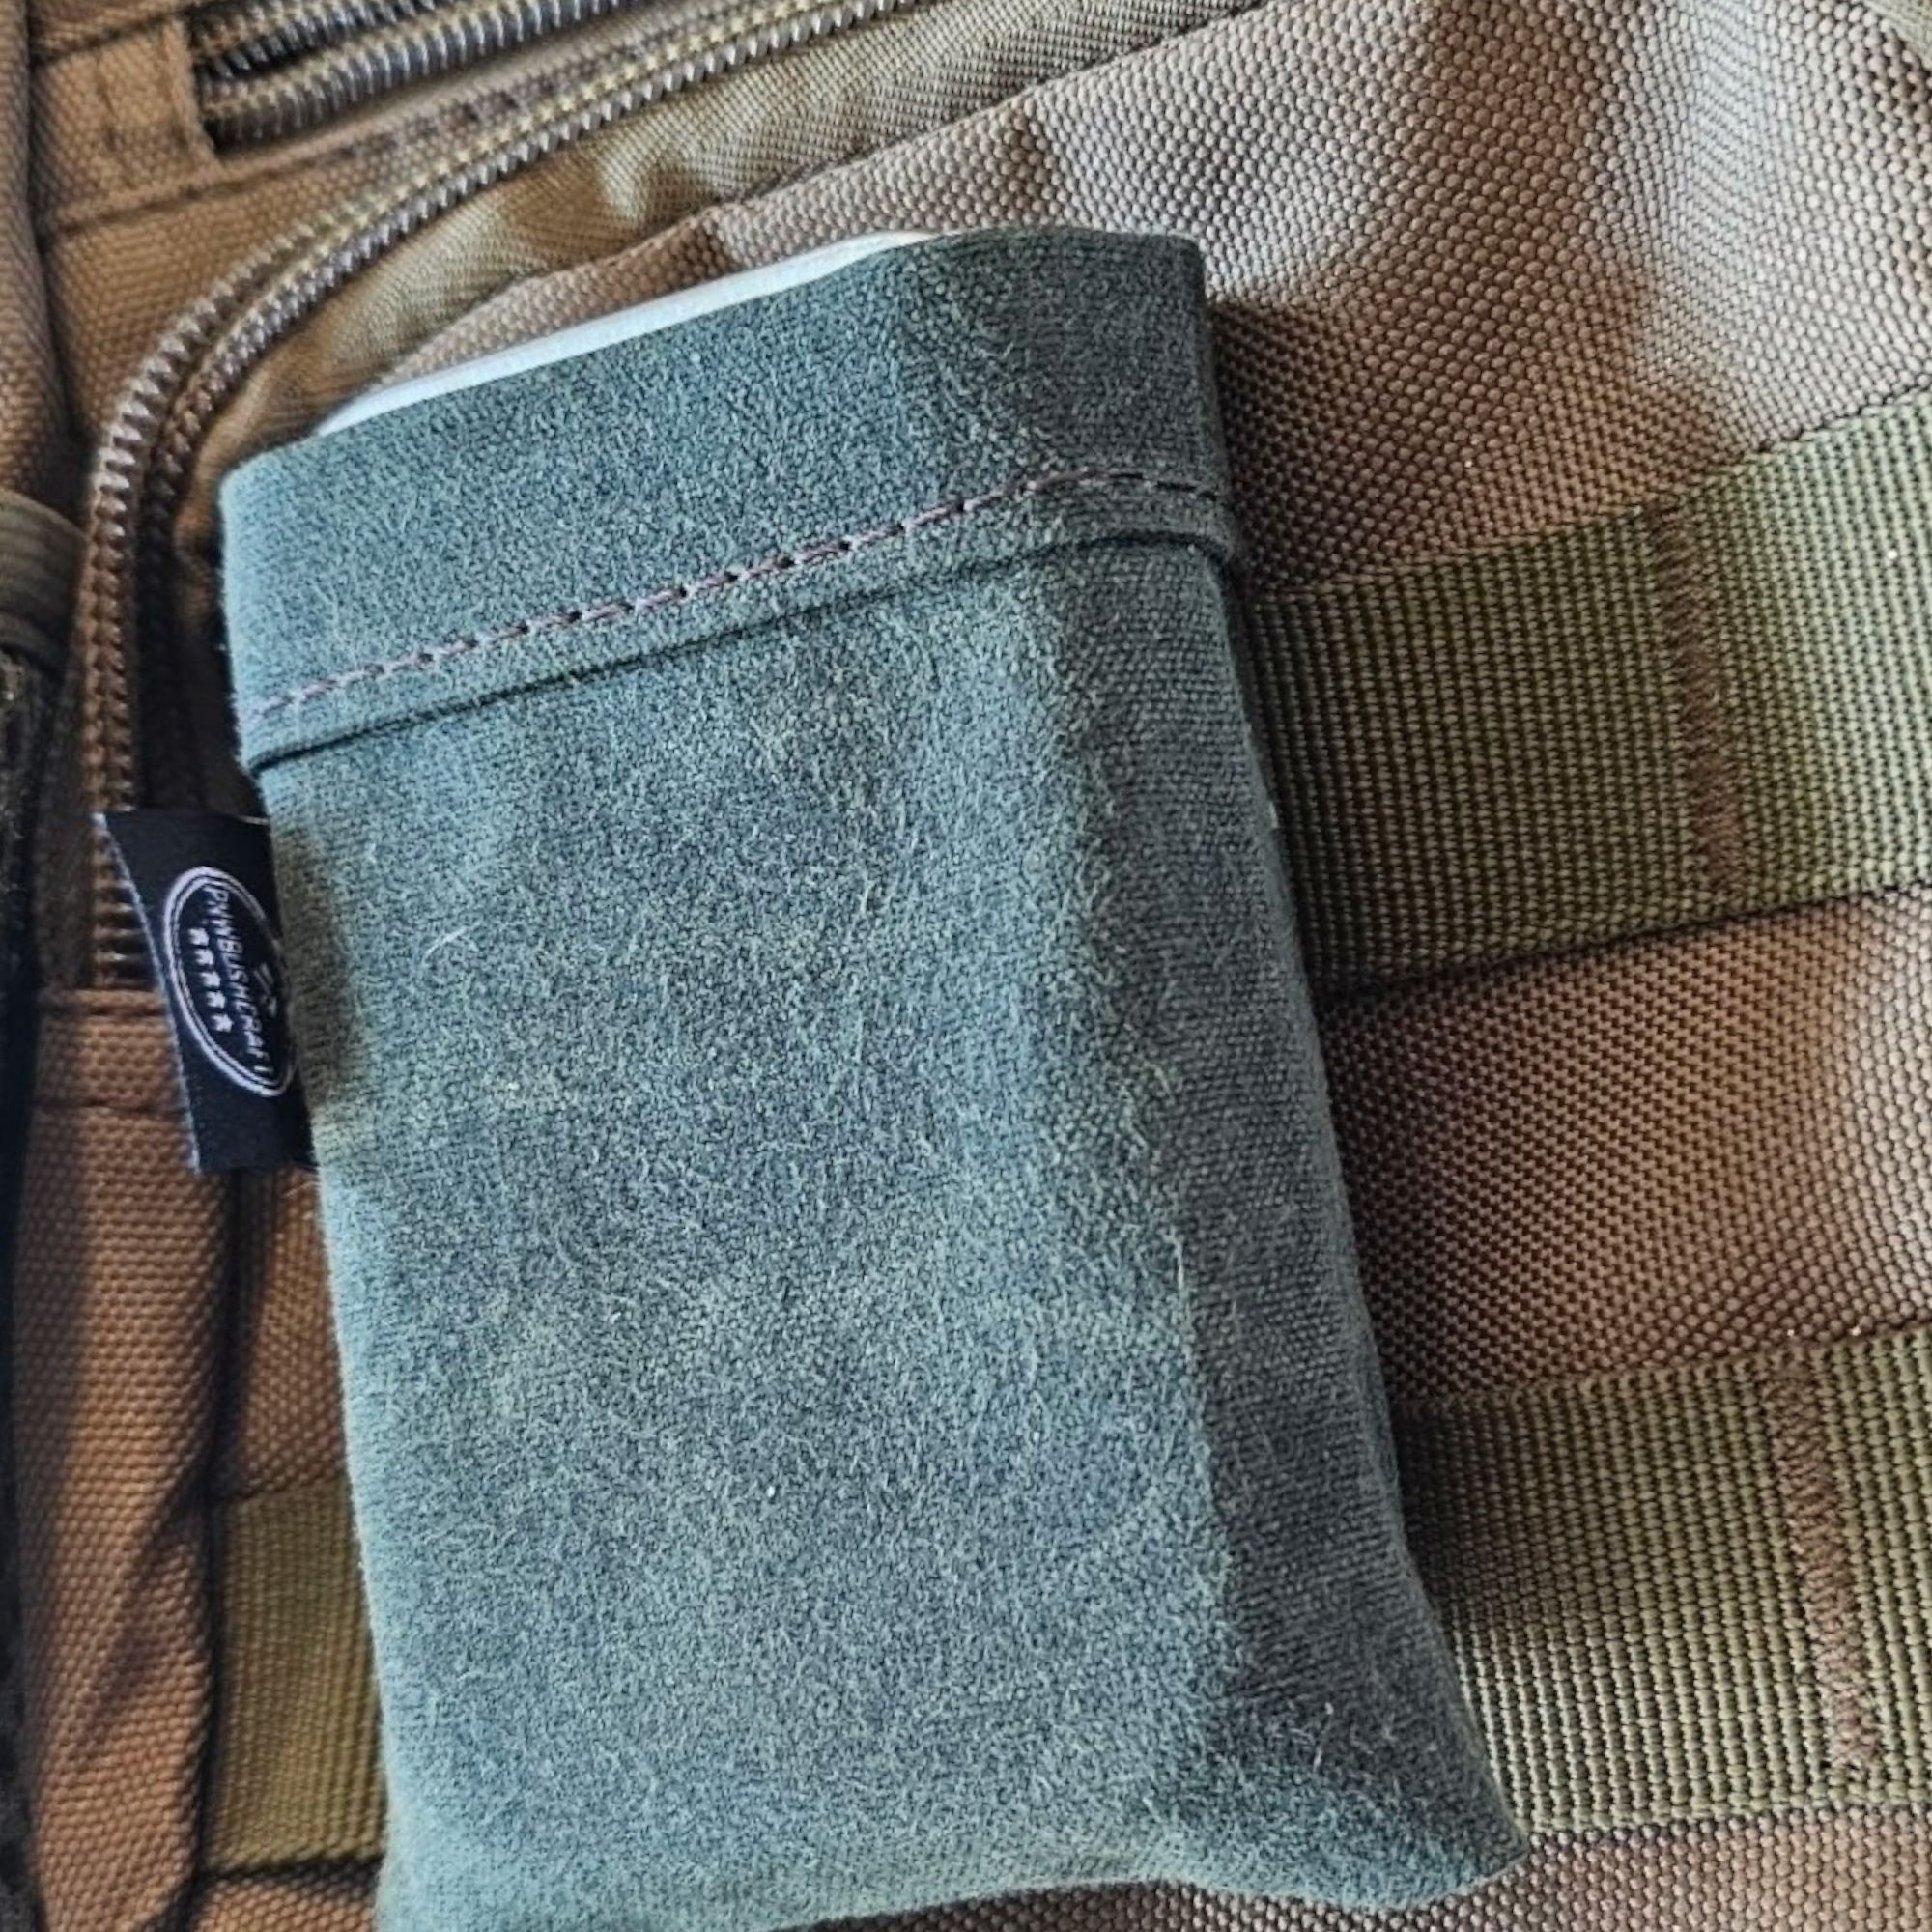 Altoids Tin Pouch: Waxed Canvas Pouch for Belts and Bags